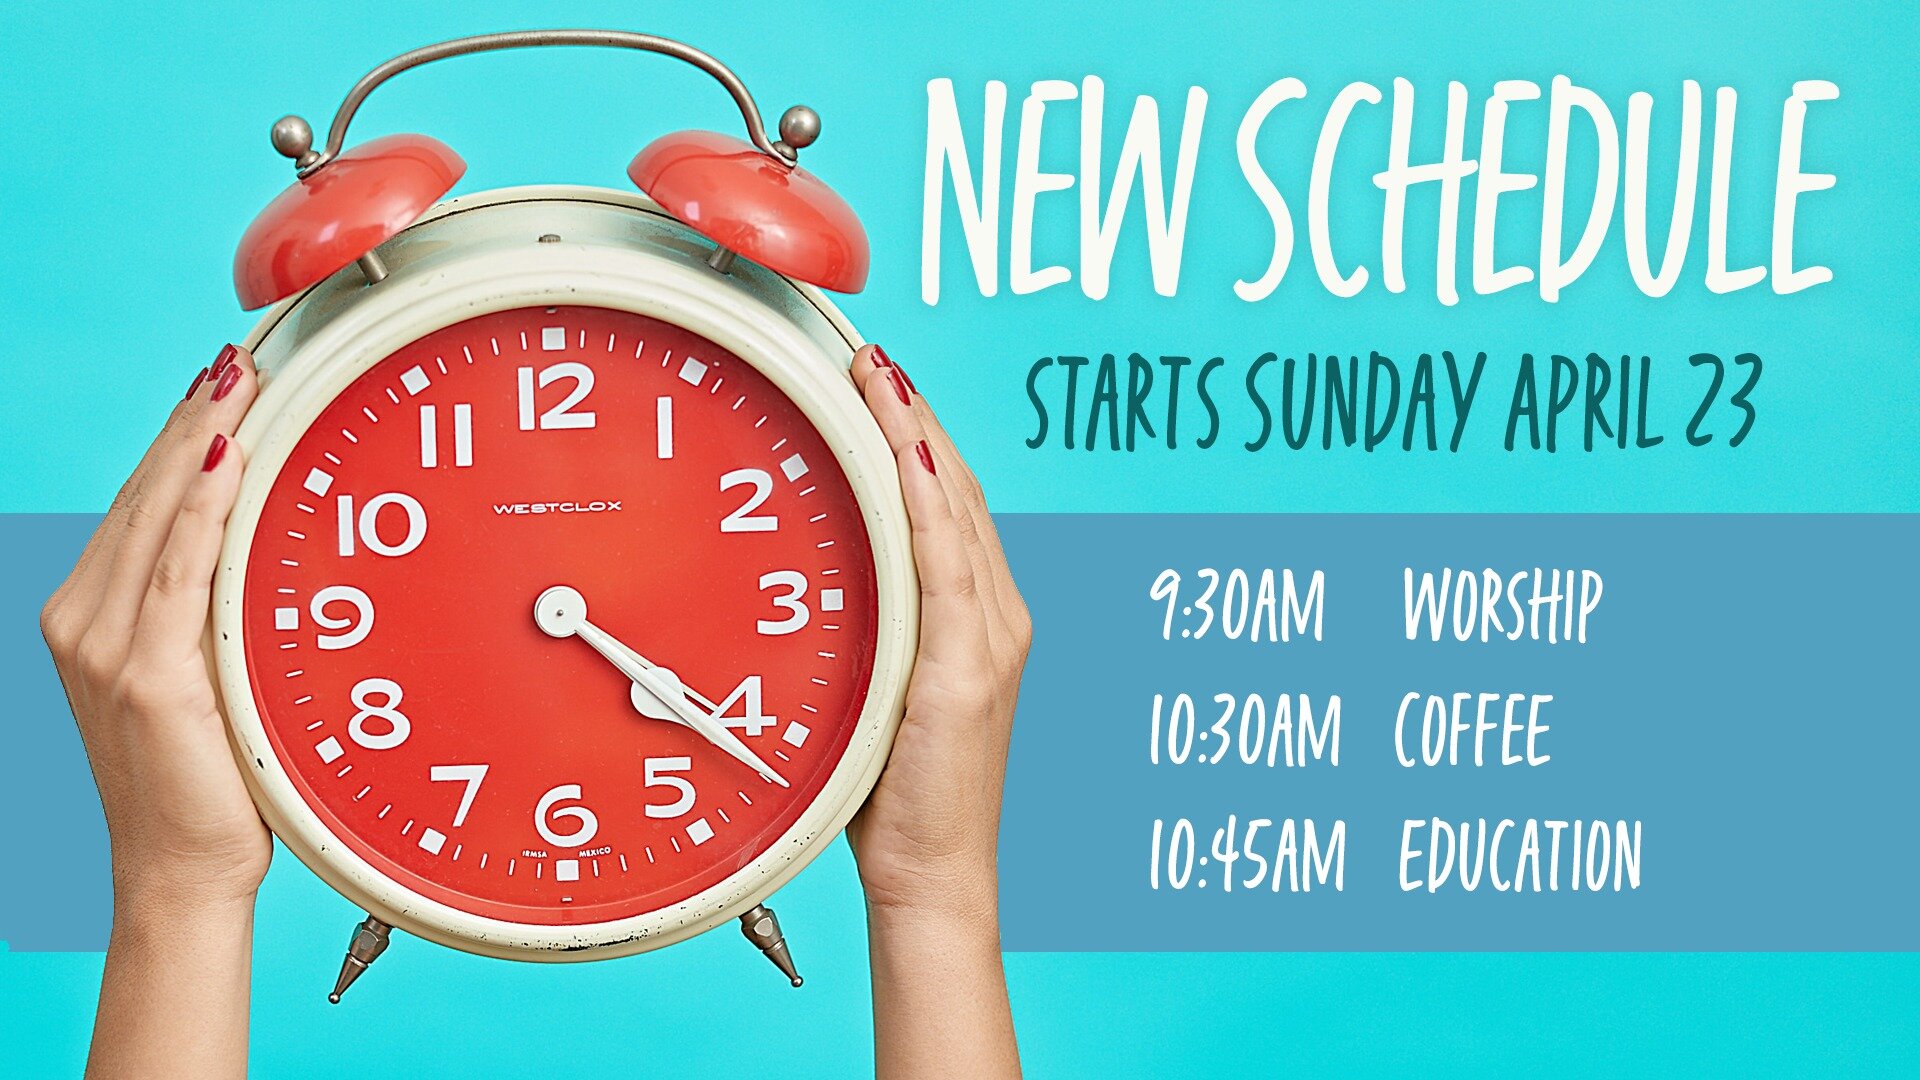 Holy Cross begins a NEW schedule on Sunday. Worship starts at 9:30 a.m. After that, get some coffee and snacks before going to Bible Study and Sunday School at 10:45 a.m. For additional information and to enroll your children for Sunday School, pleas